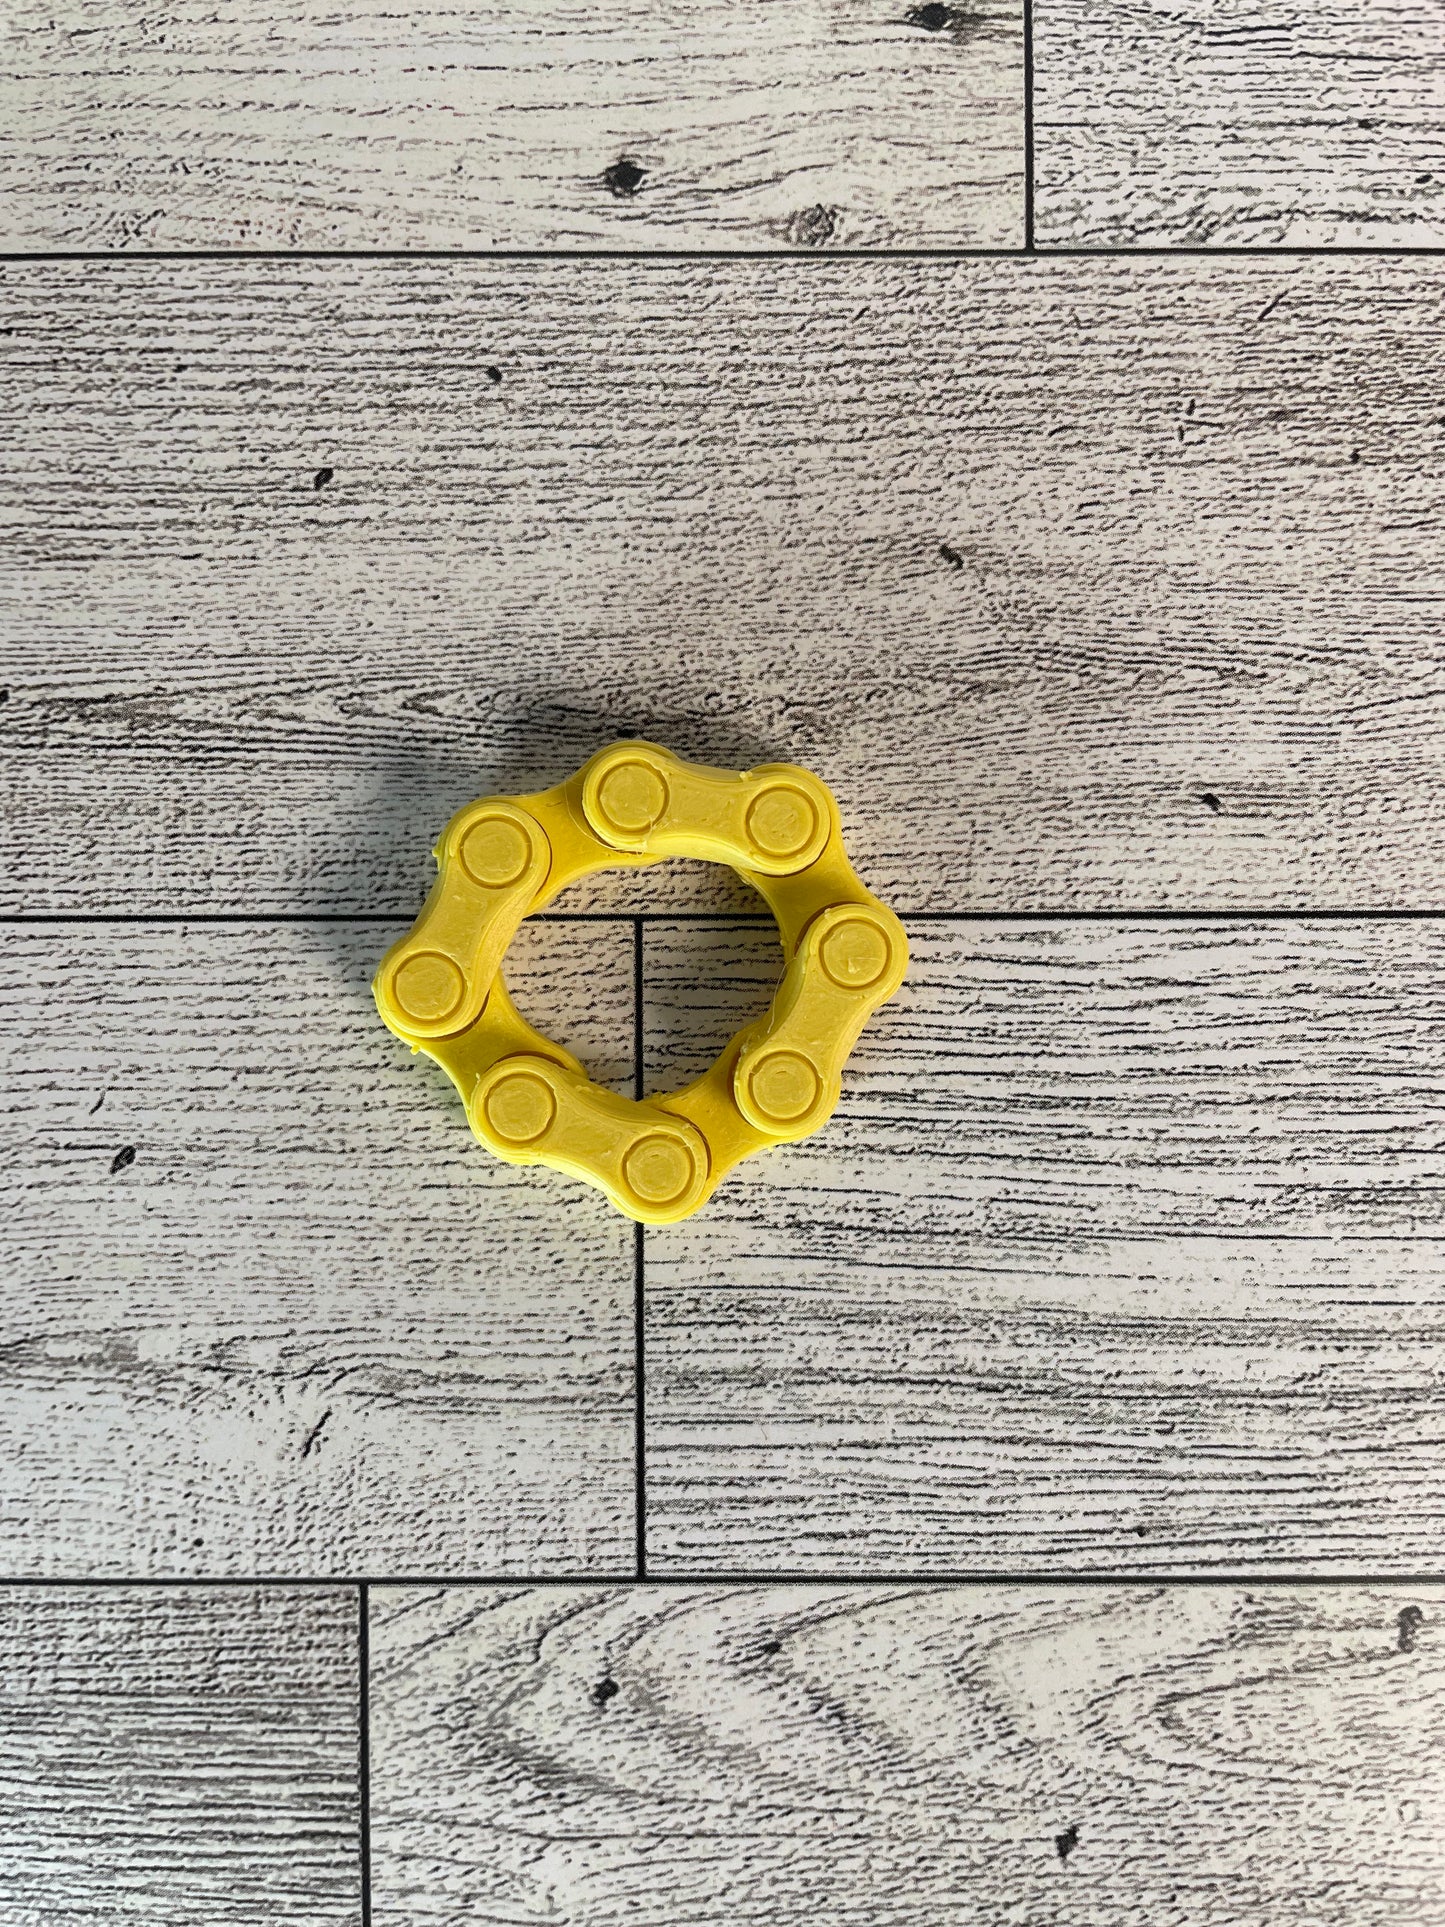 A yellow chain link on a wood backdrop. The chain is arranged in a circle shape and there are four links.